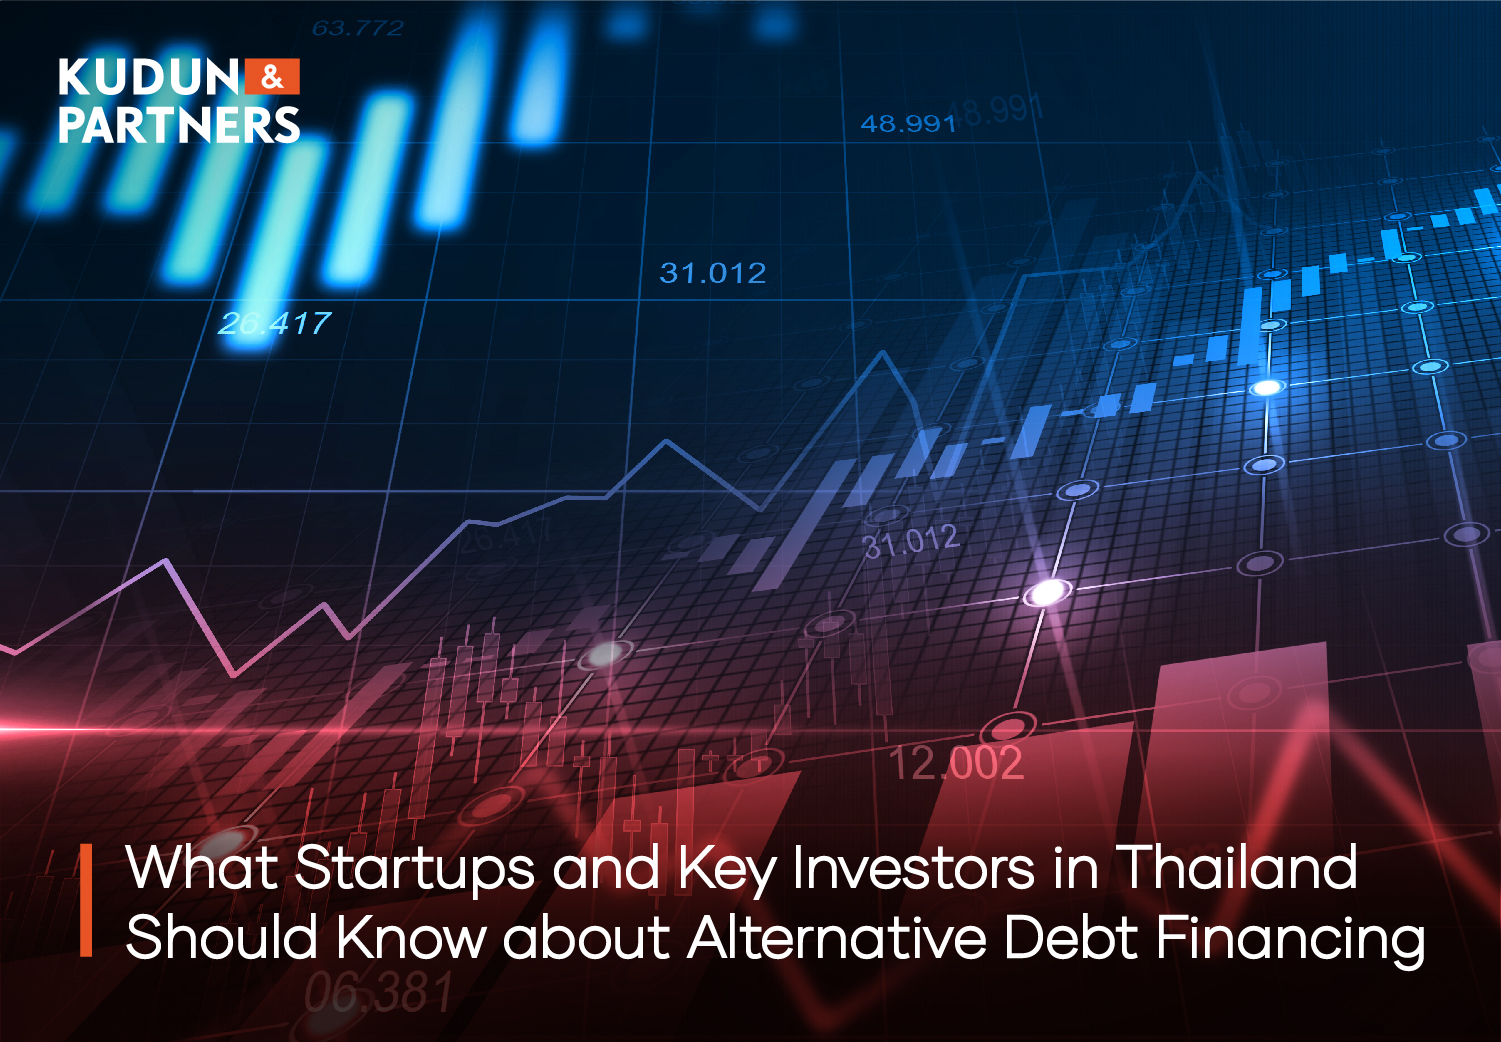 What Startups and Key Investors in Thailand Should Know about Alternative Debt Financing